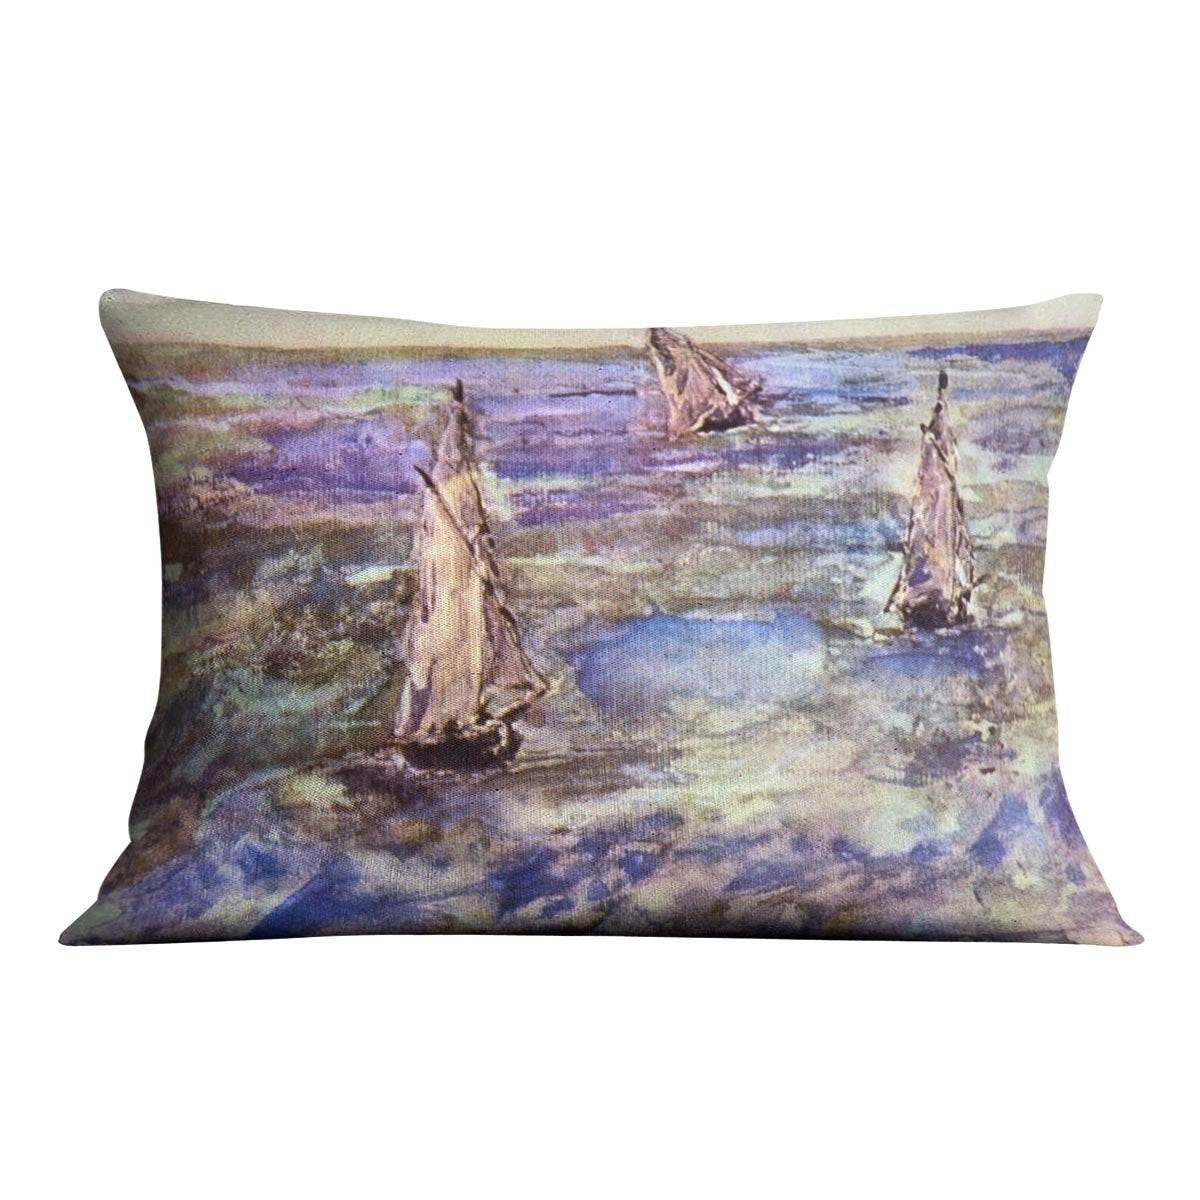 Seascape 1873 by Manet Throw Pillow